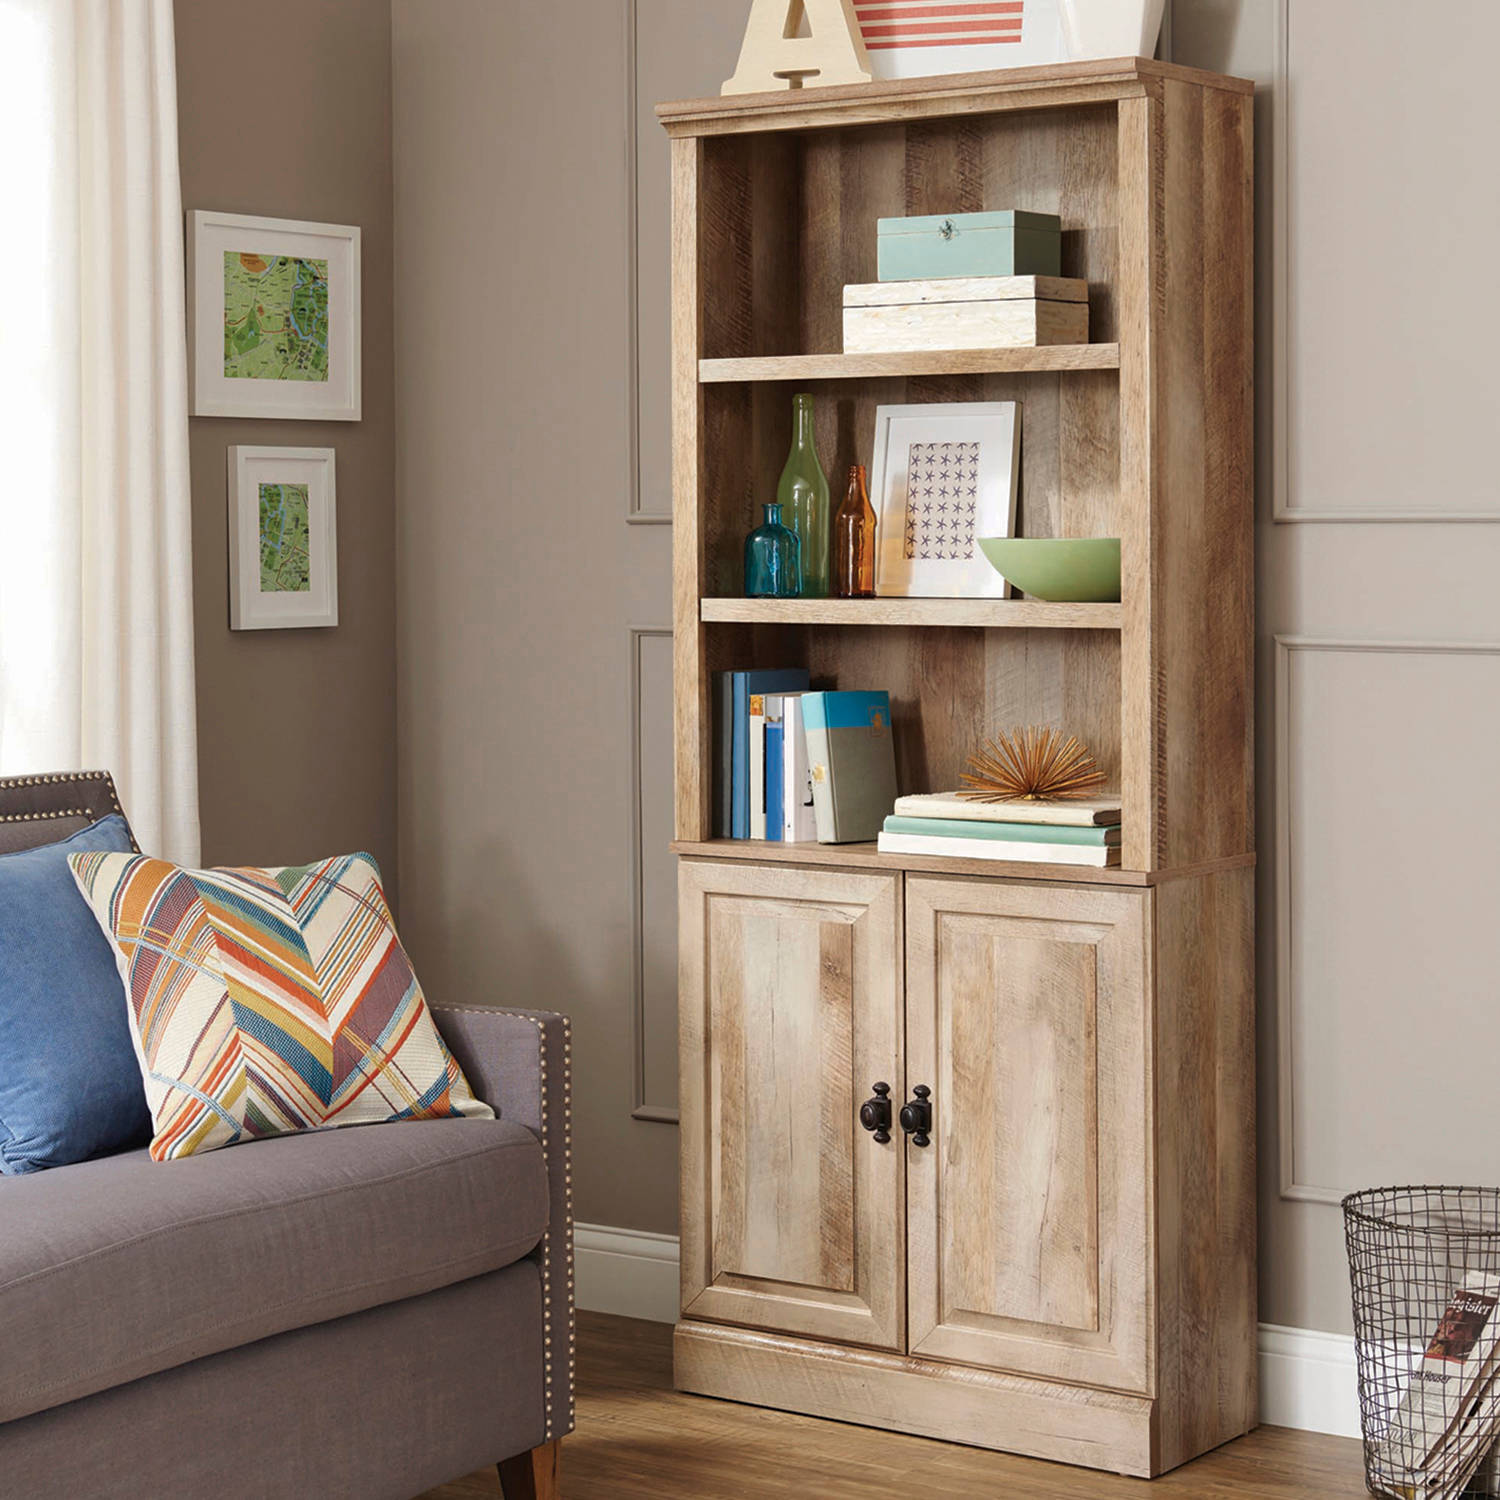 Better Homes & Gardens 71" Crossmill 5 Shelf Bookcase with Doors, Weathered Wood Finish - image 1 of 10